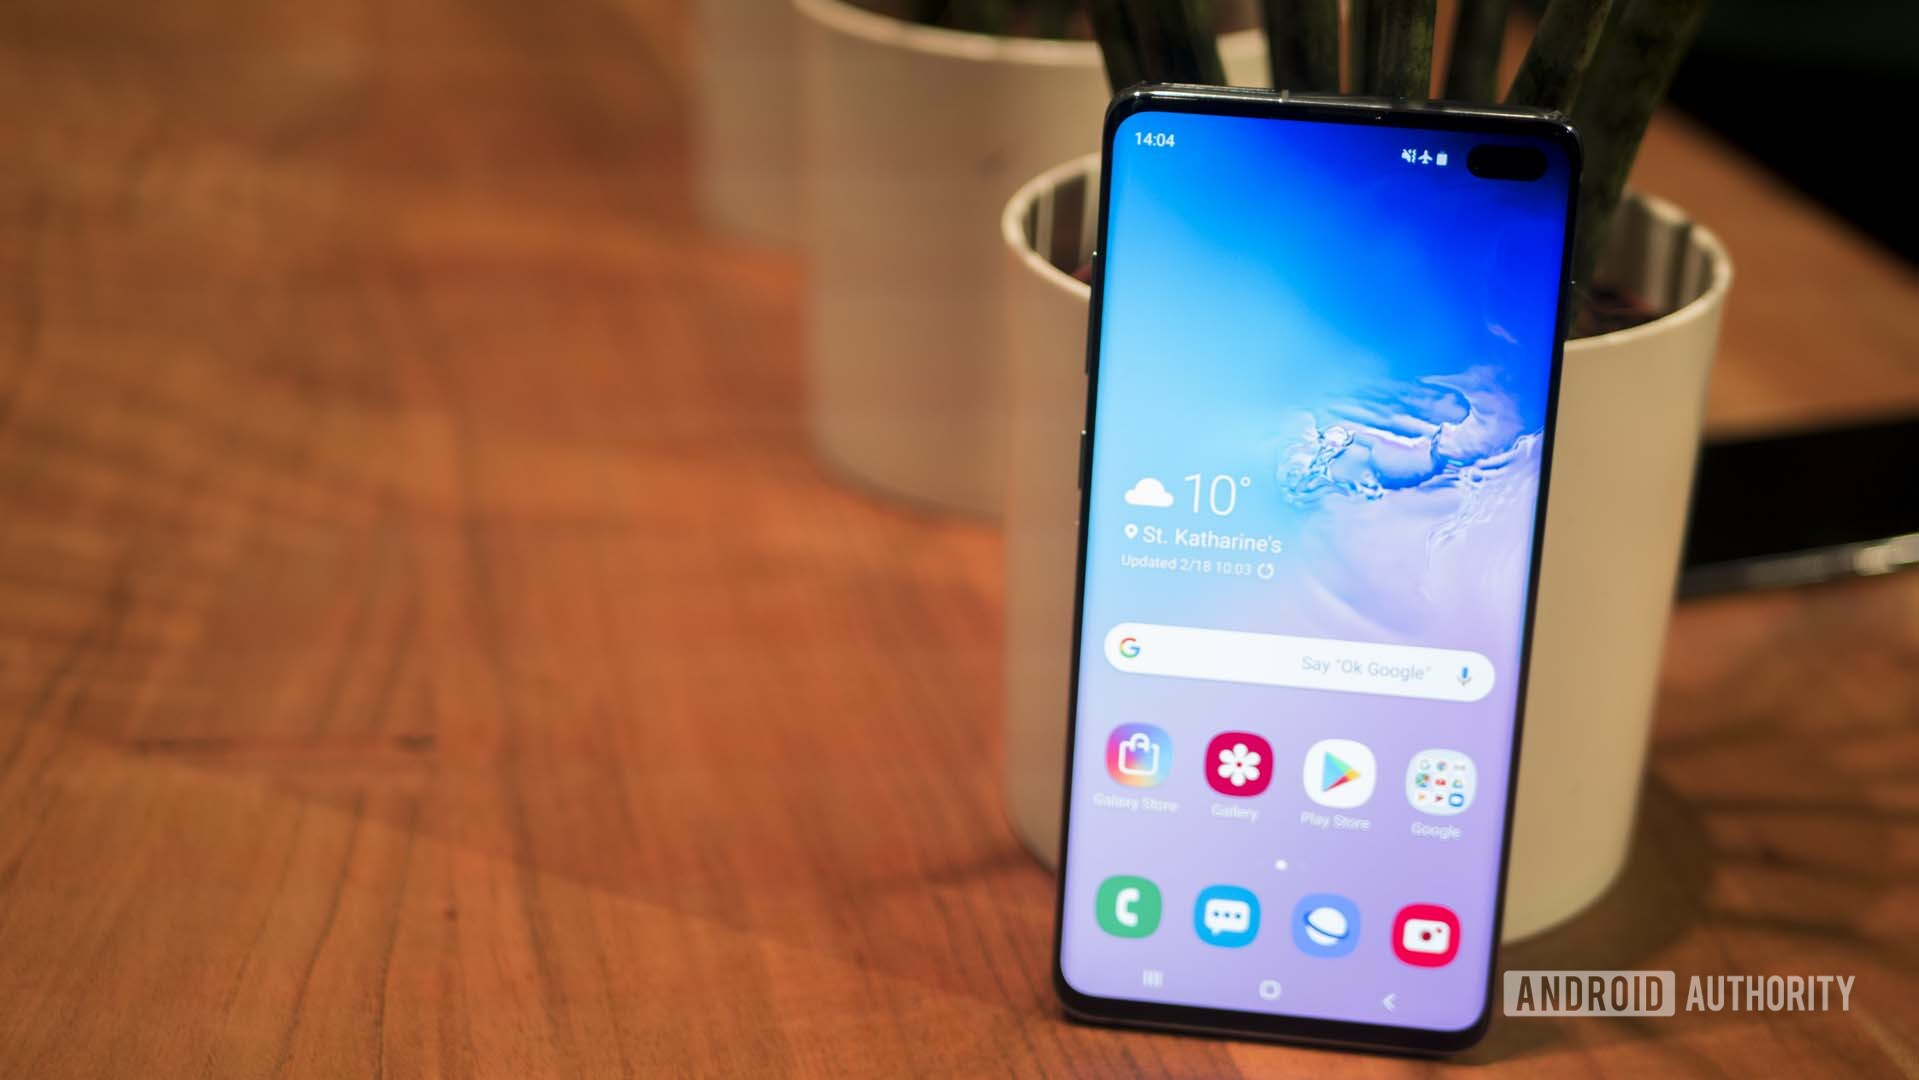 Samsung Galaxy S10 Plus Front with the default wallpaper shown.